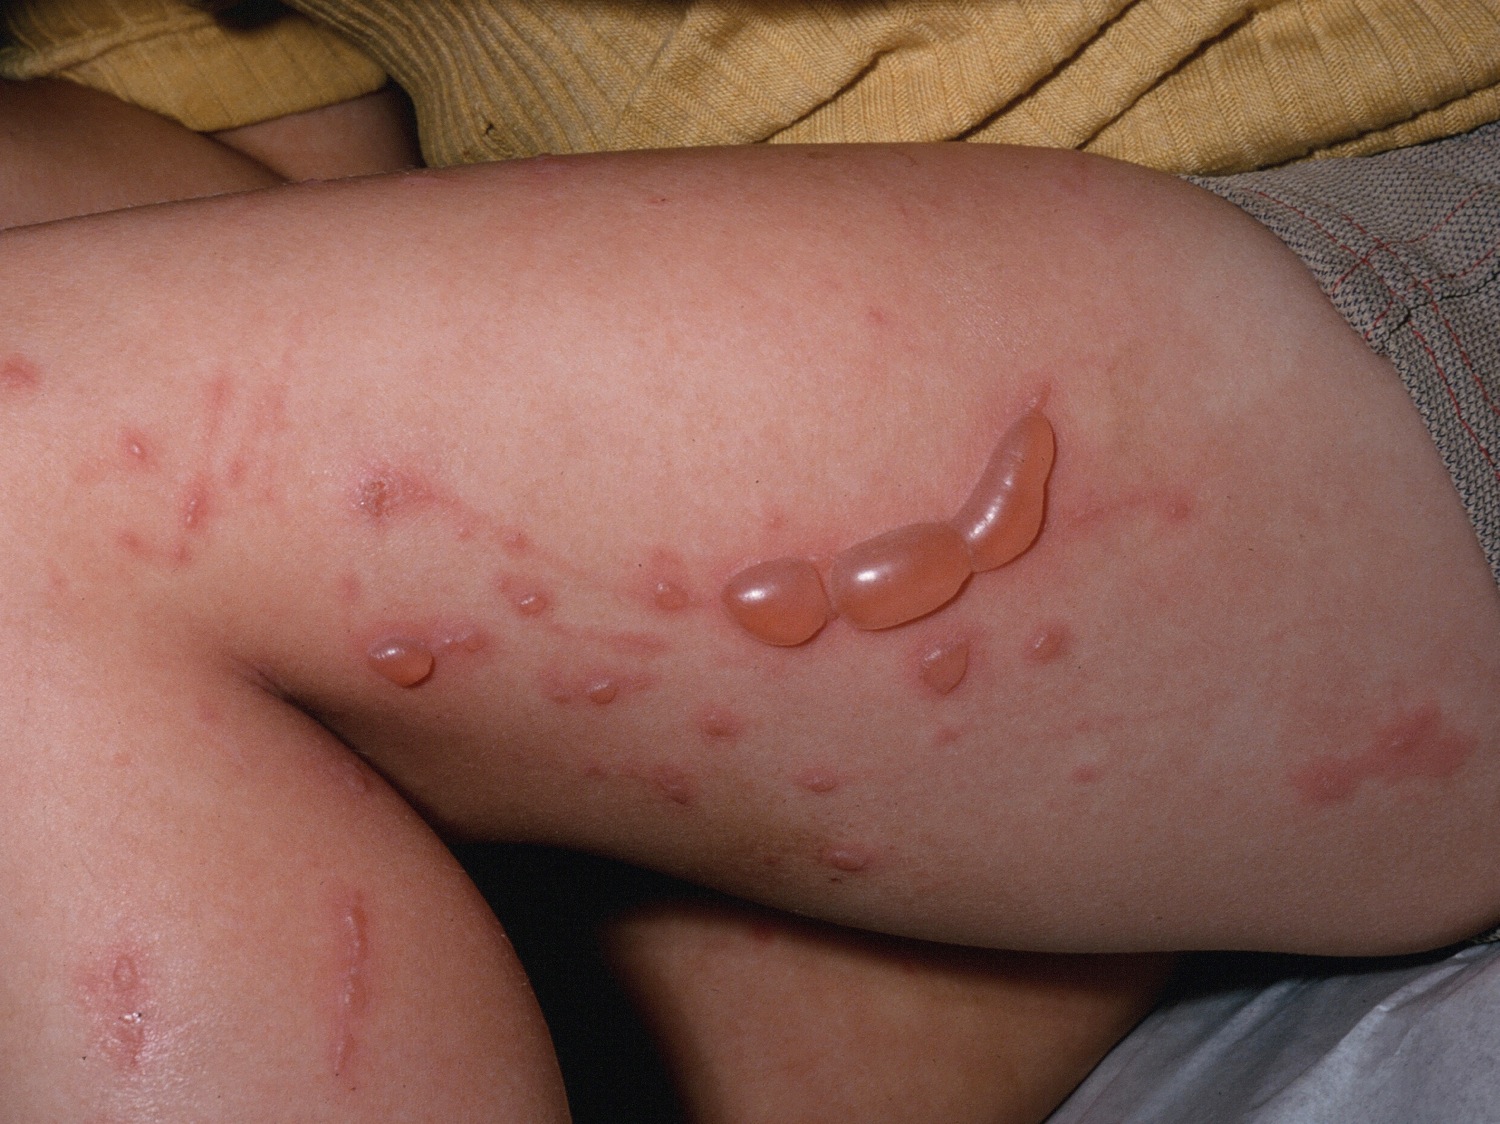 Poison Ivy Rash Causes How To Identify Poison Ivy Rash Treatment,Steaming Green Beans In Pressure Cooker